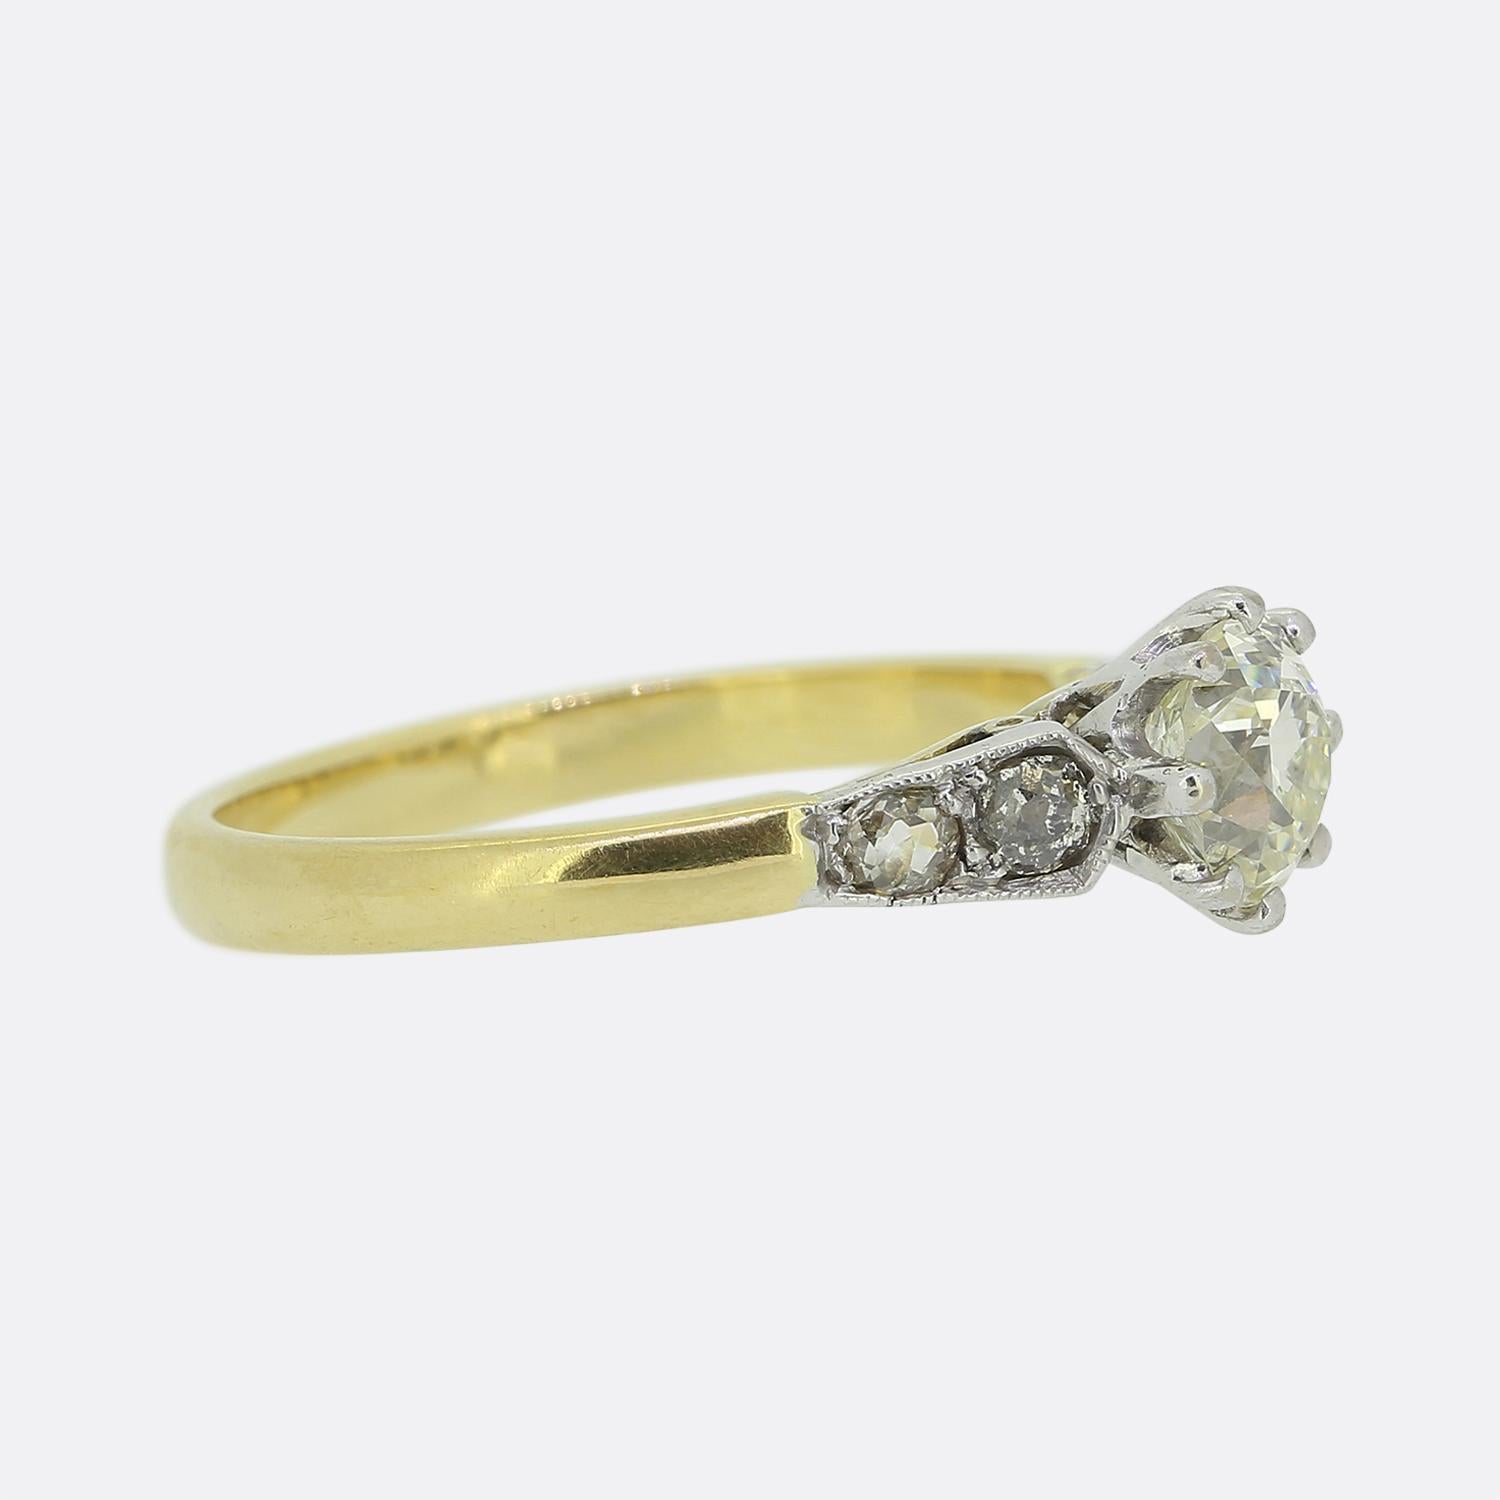 Old Mine Cut Edwardian 1.05 Carat Diamond Solitaire Engagement Ring For Sale